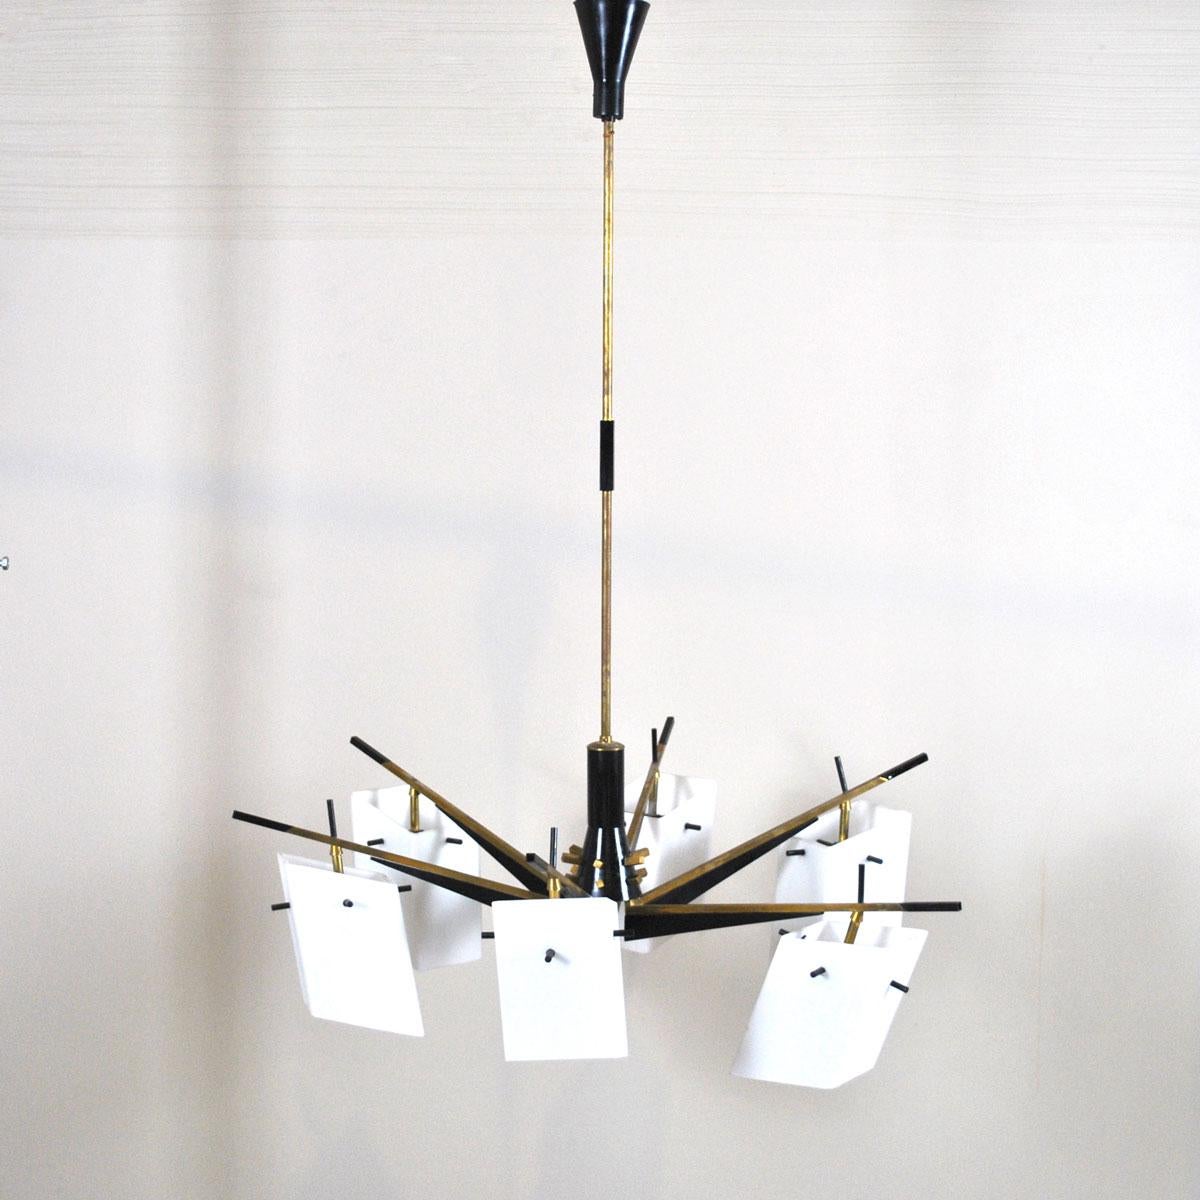 Mid-20th Century Stilux Chandelier Italian Midcentury from the 1960s For Sale